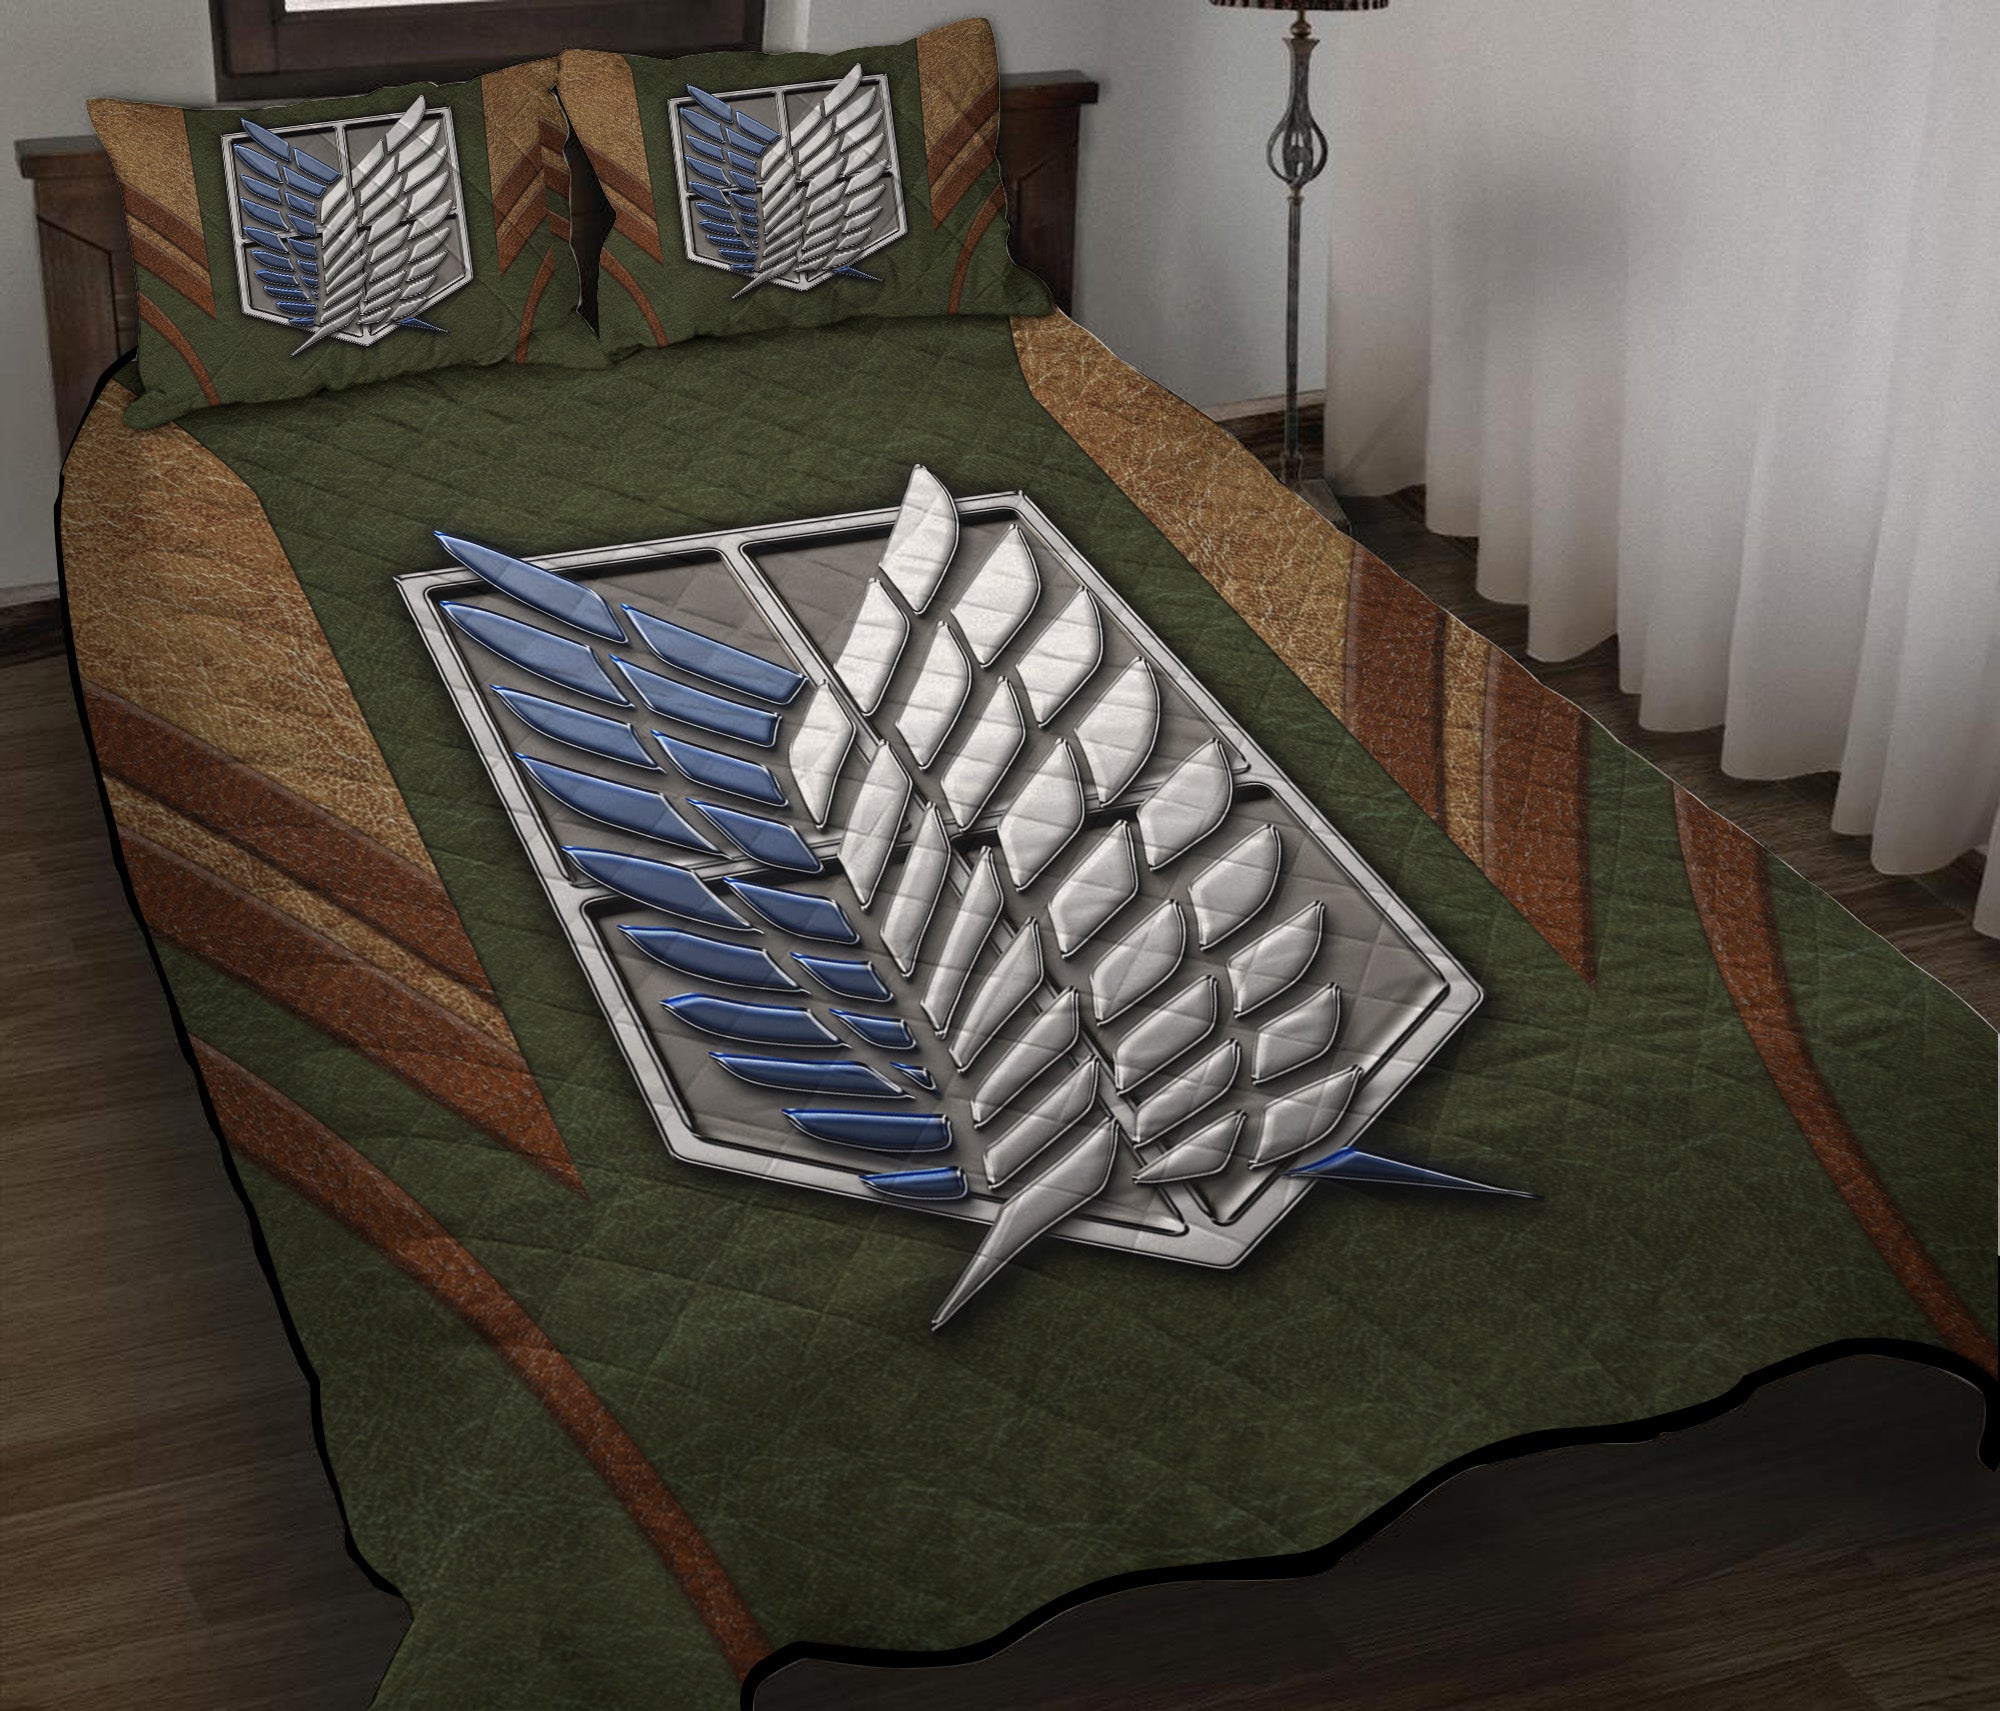 Attack On Titans Army Quilt Bed Sets Nearkii